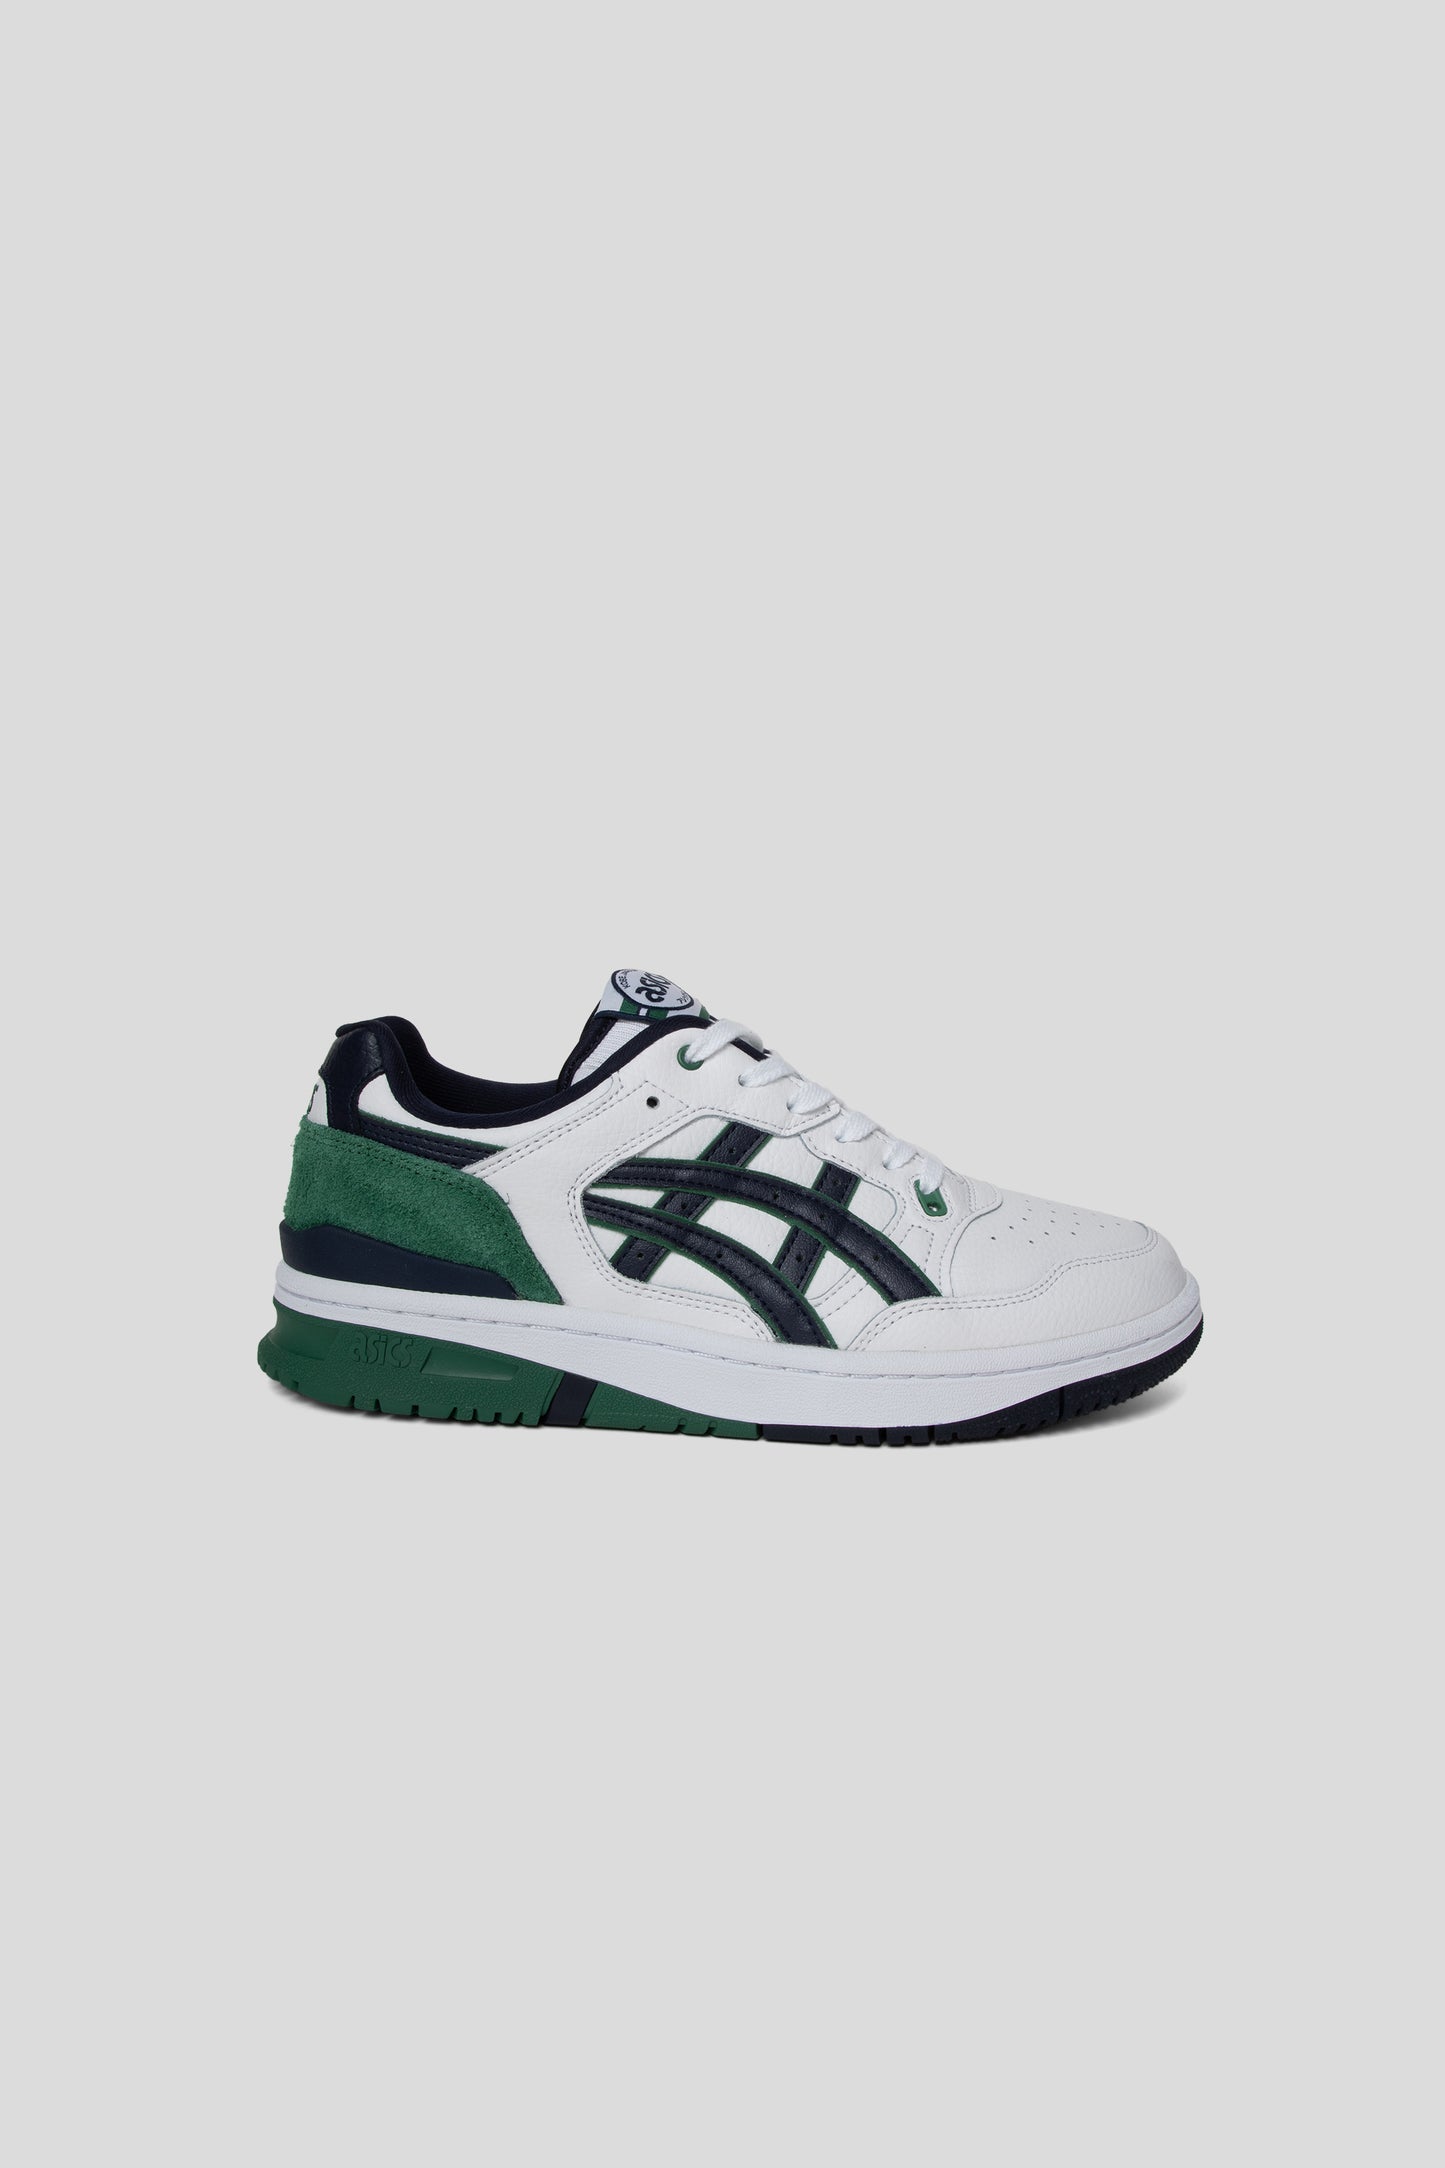 Asics EX89 Shoe in White and Midnight